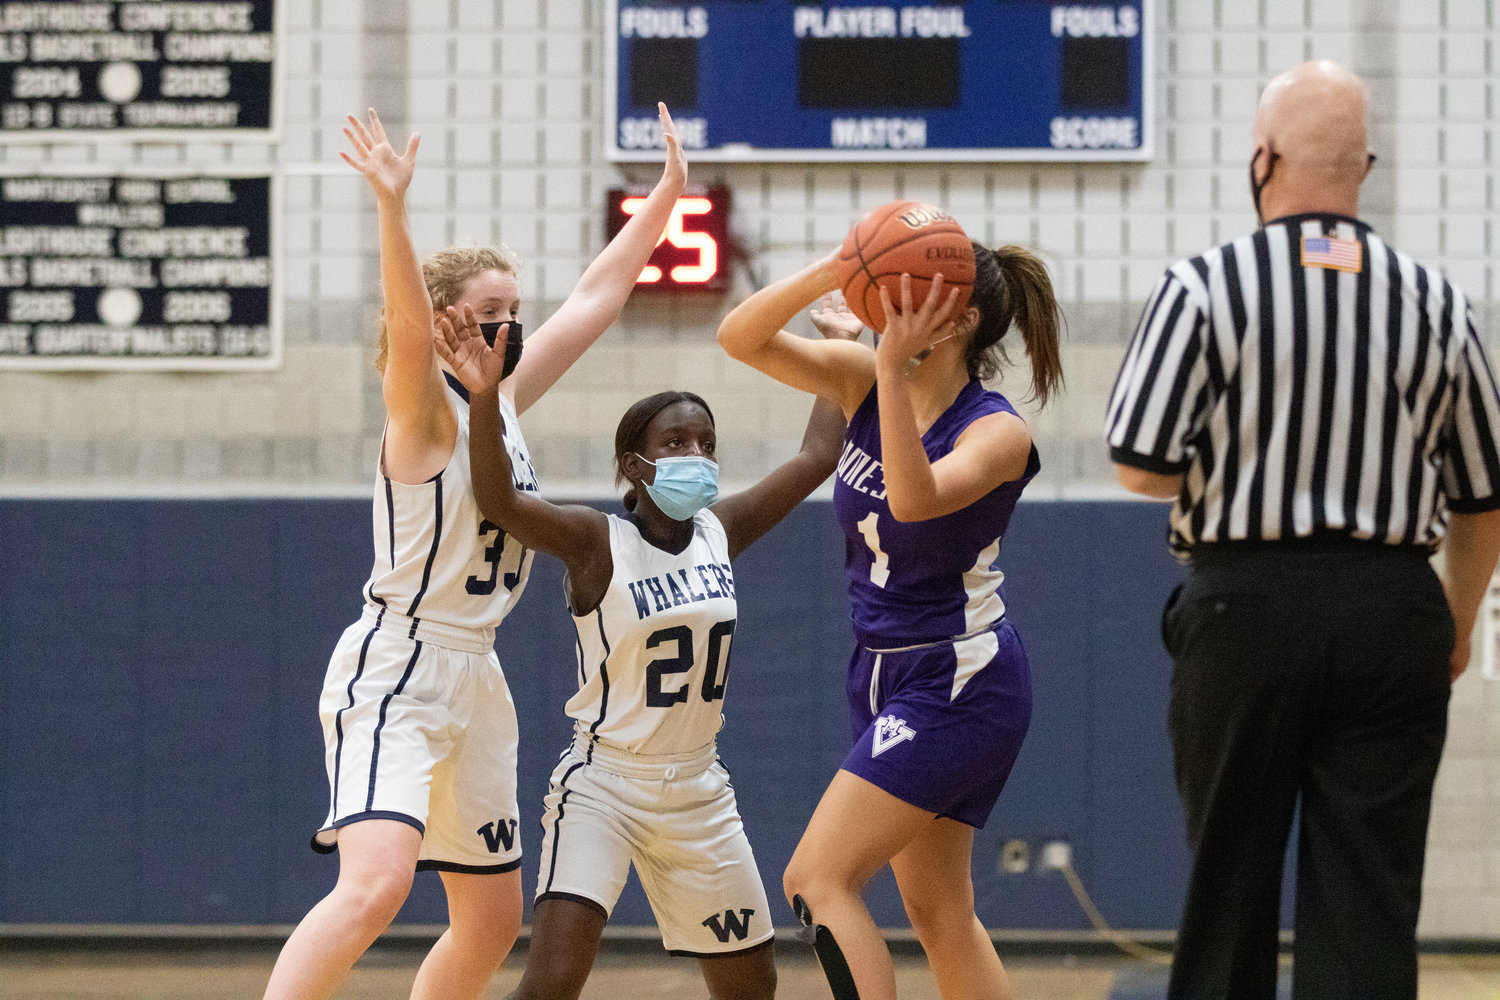 Lady Whalers play defense against MV